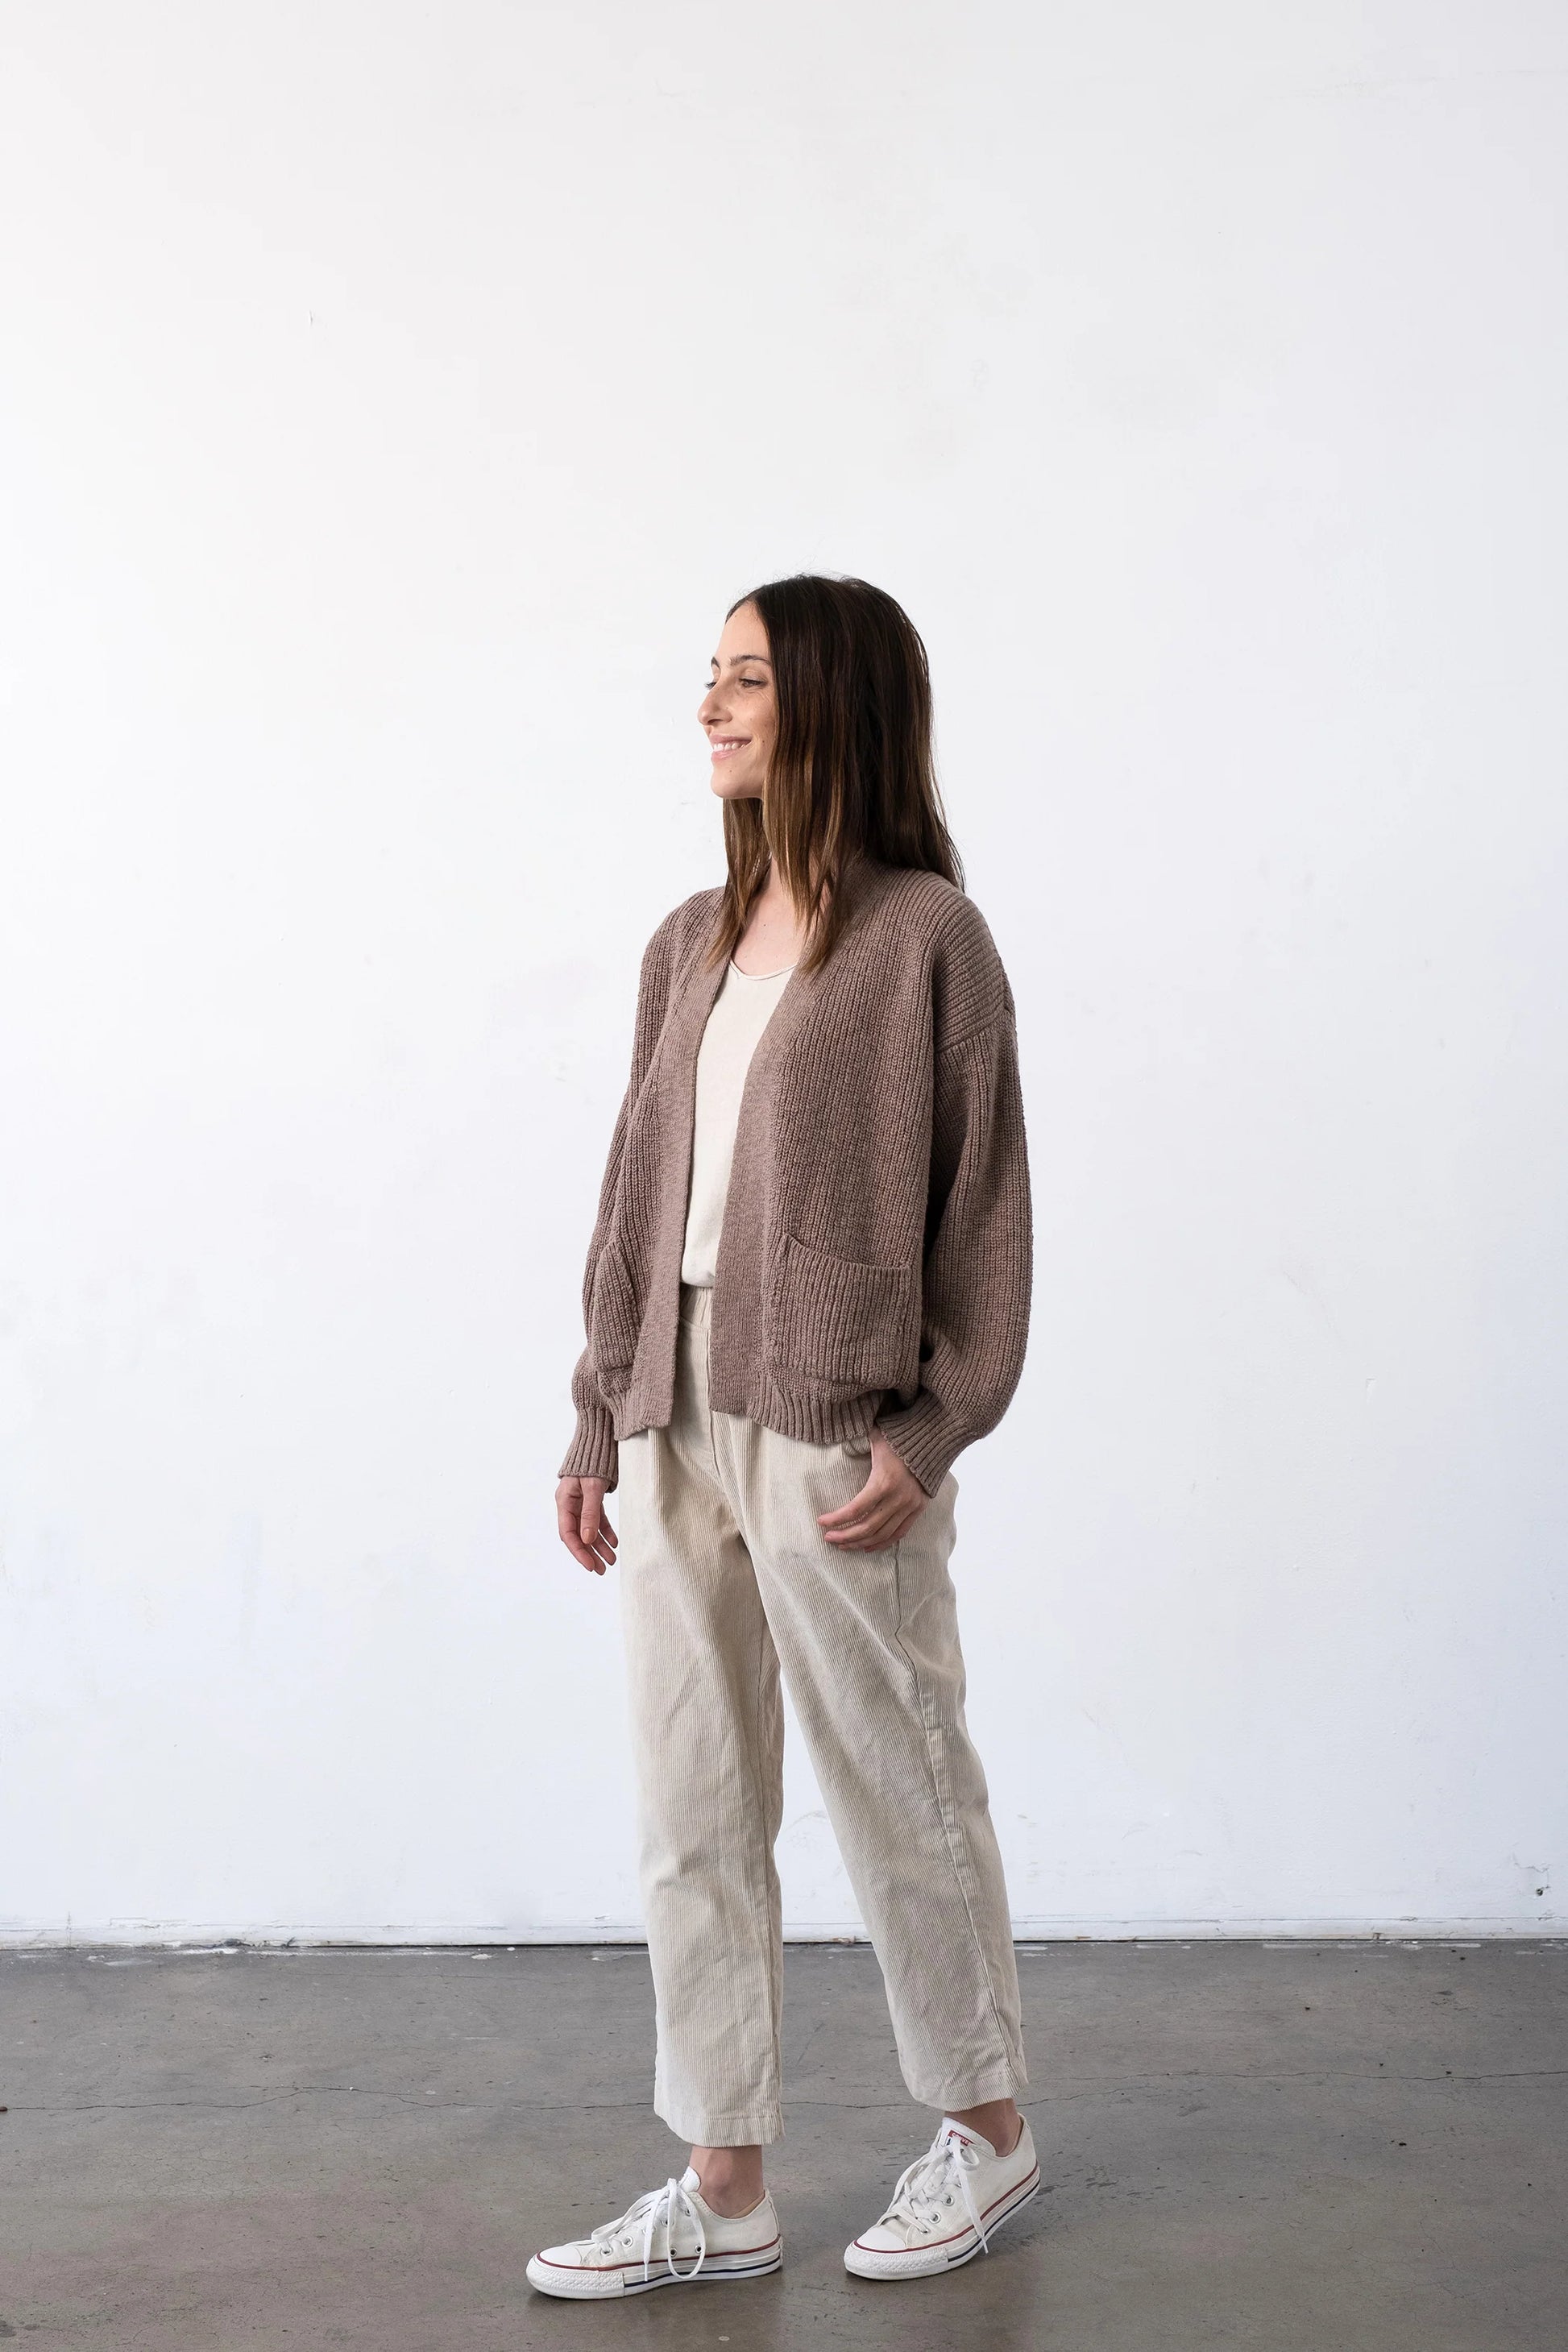 IT IS WELL LA - Elevated Ethical Basics - Easy Open Style Cardigan with Front Patch Pockets on Model - Camel Cotton - Made in USA